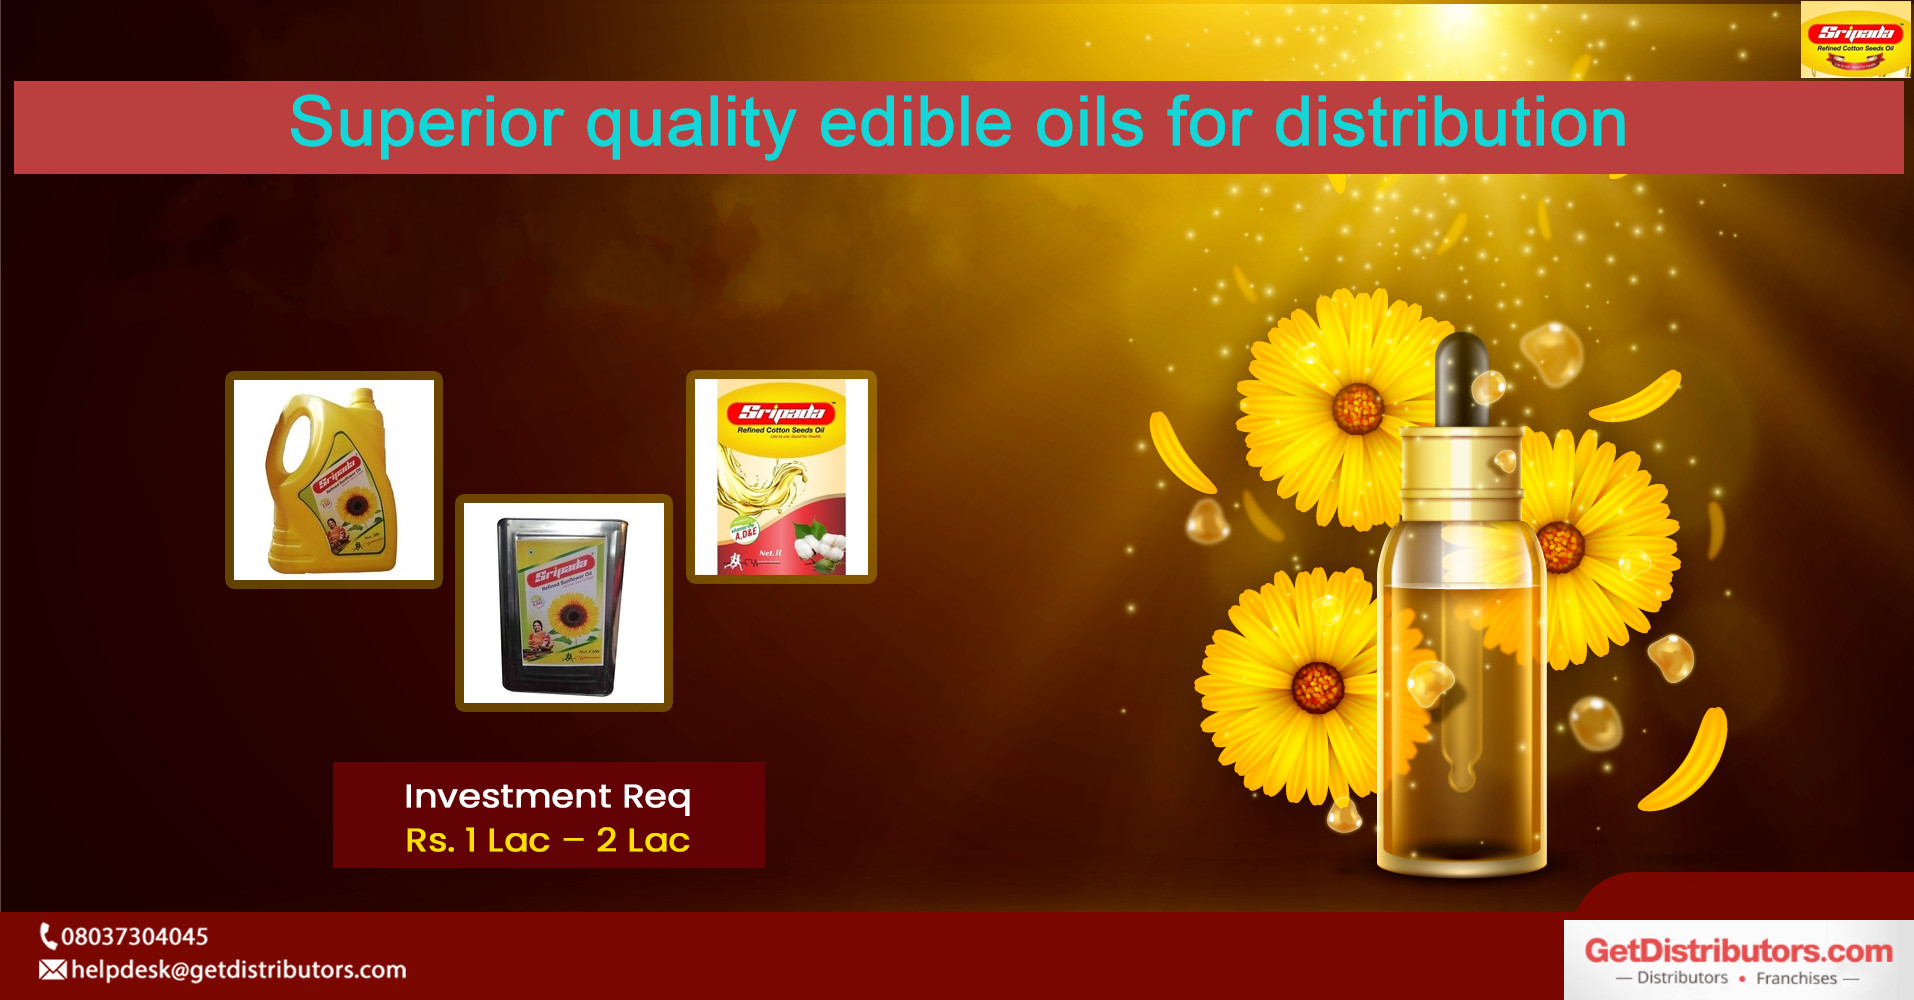 Superior quality edible oils for distribution